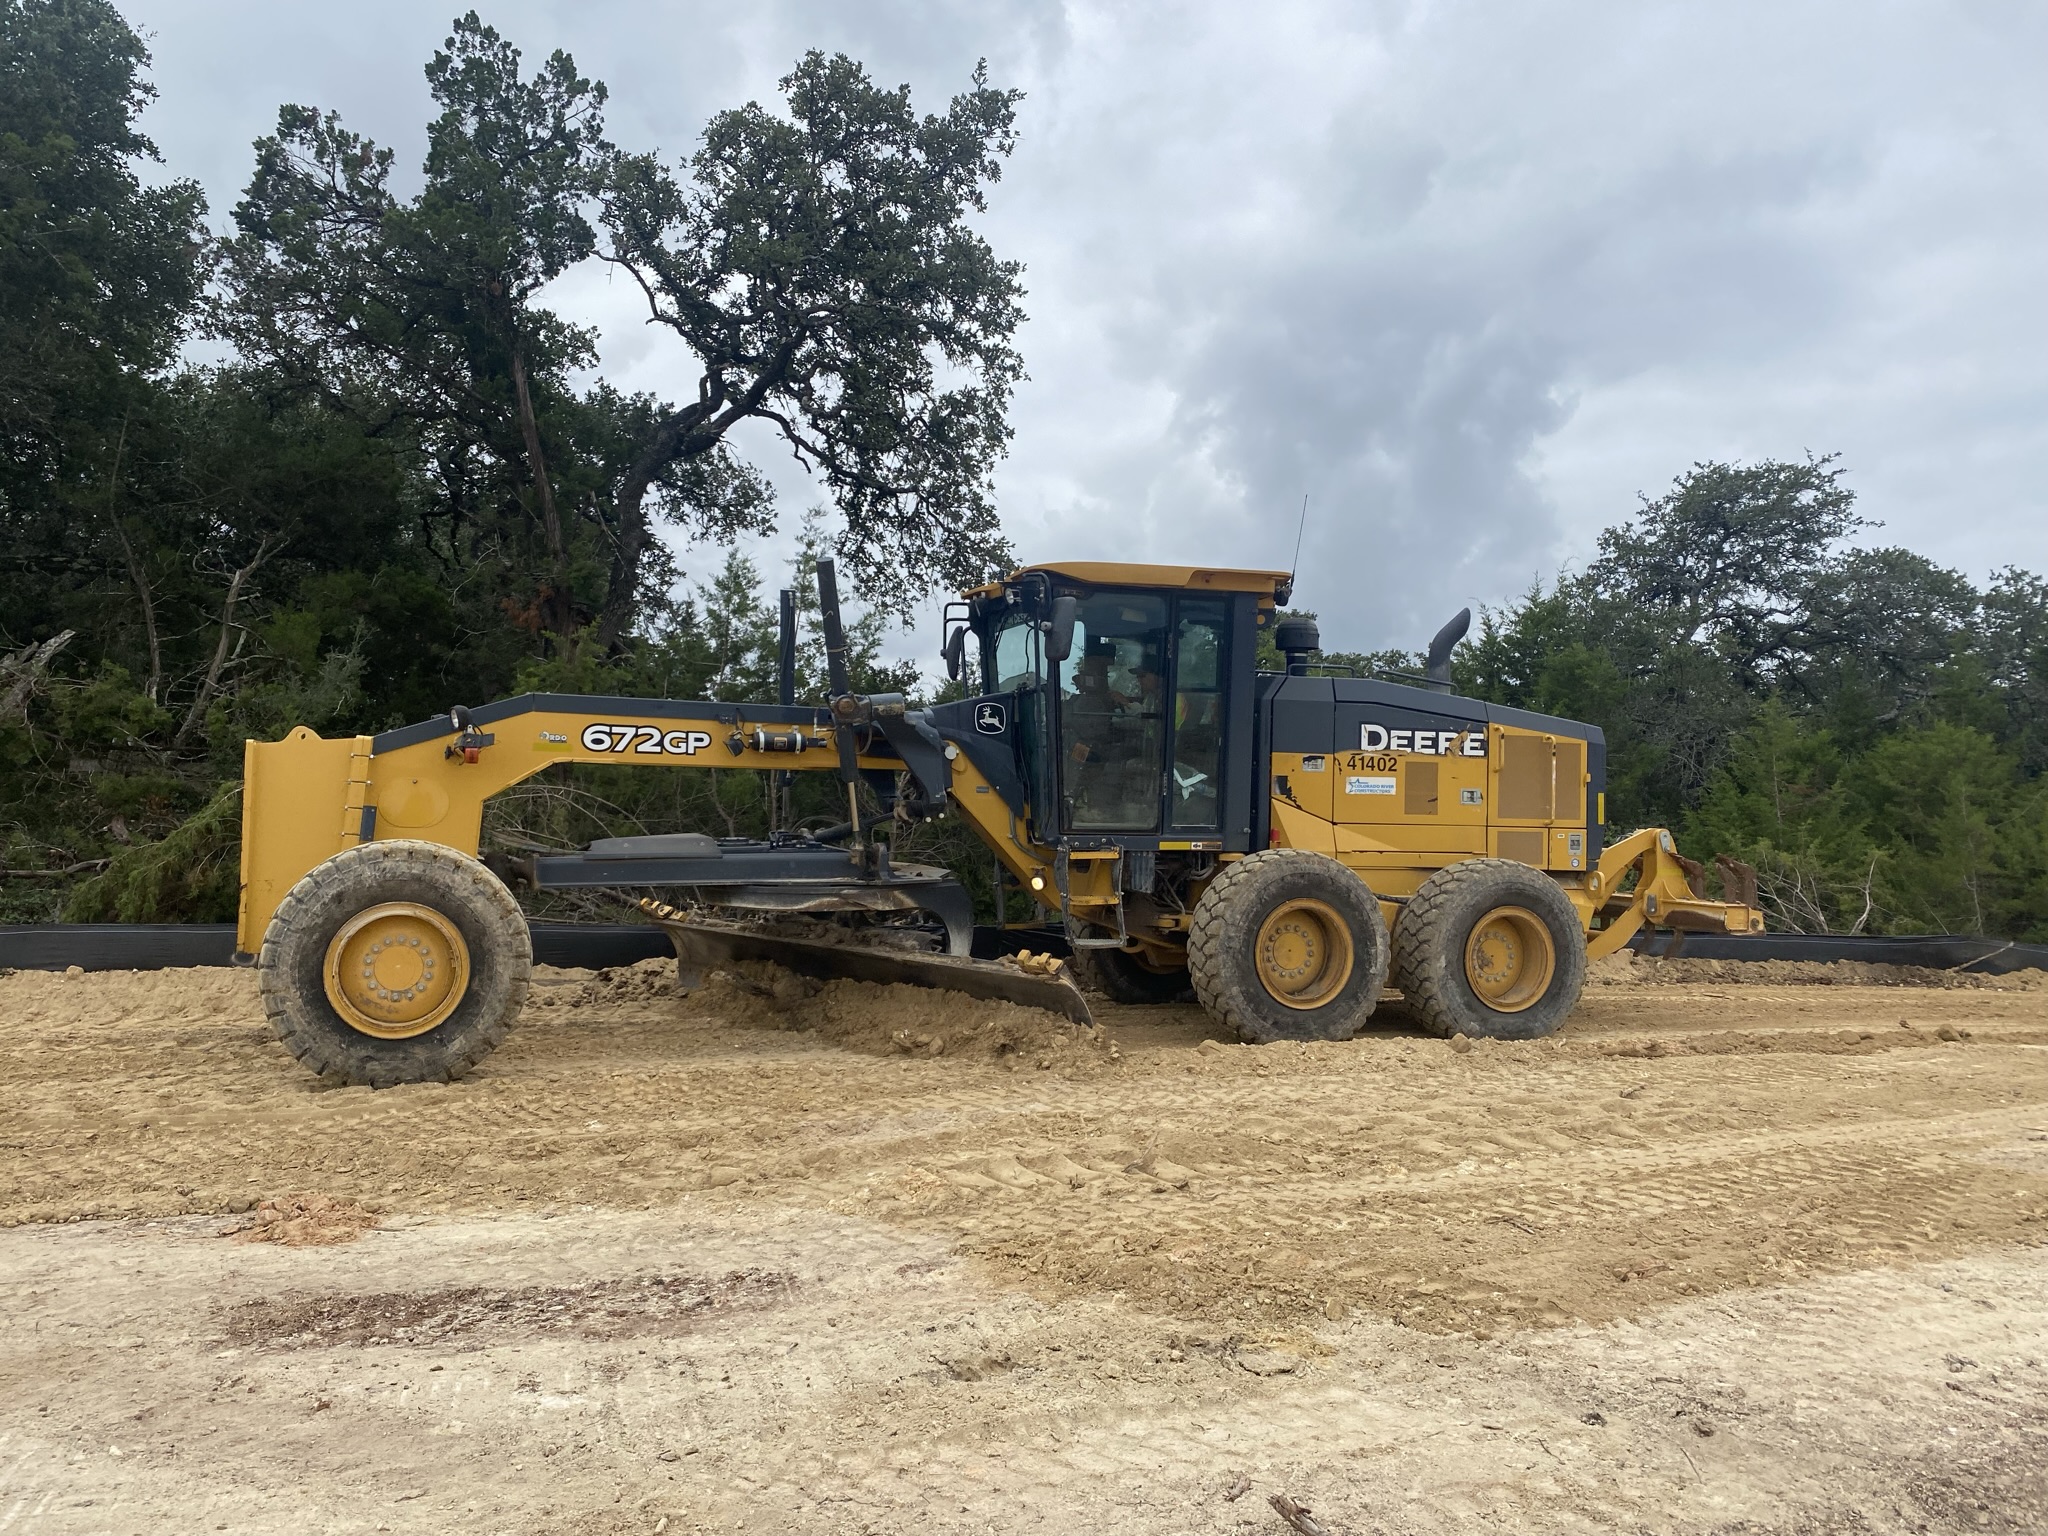 A motor grader is used to create a smooth, wide-ranging, and level surface in advance of sound wall construction activities along the US 290 West Segment. October 2021